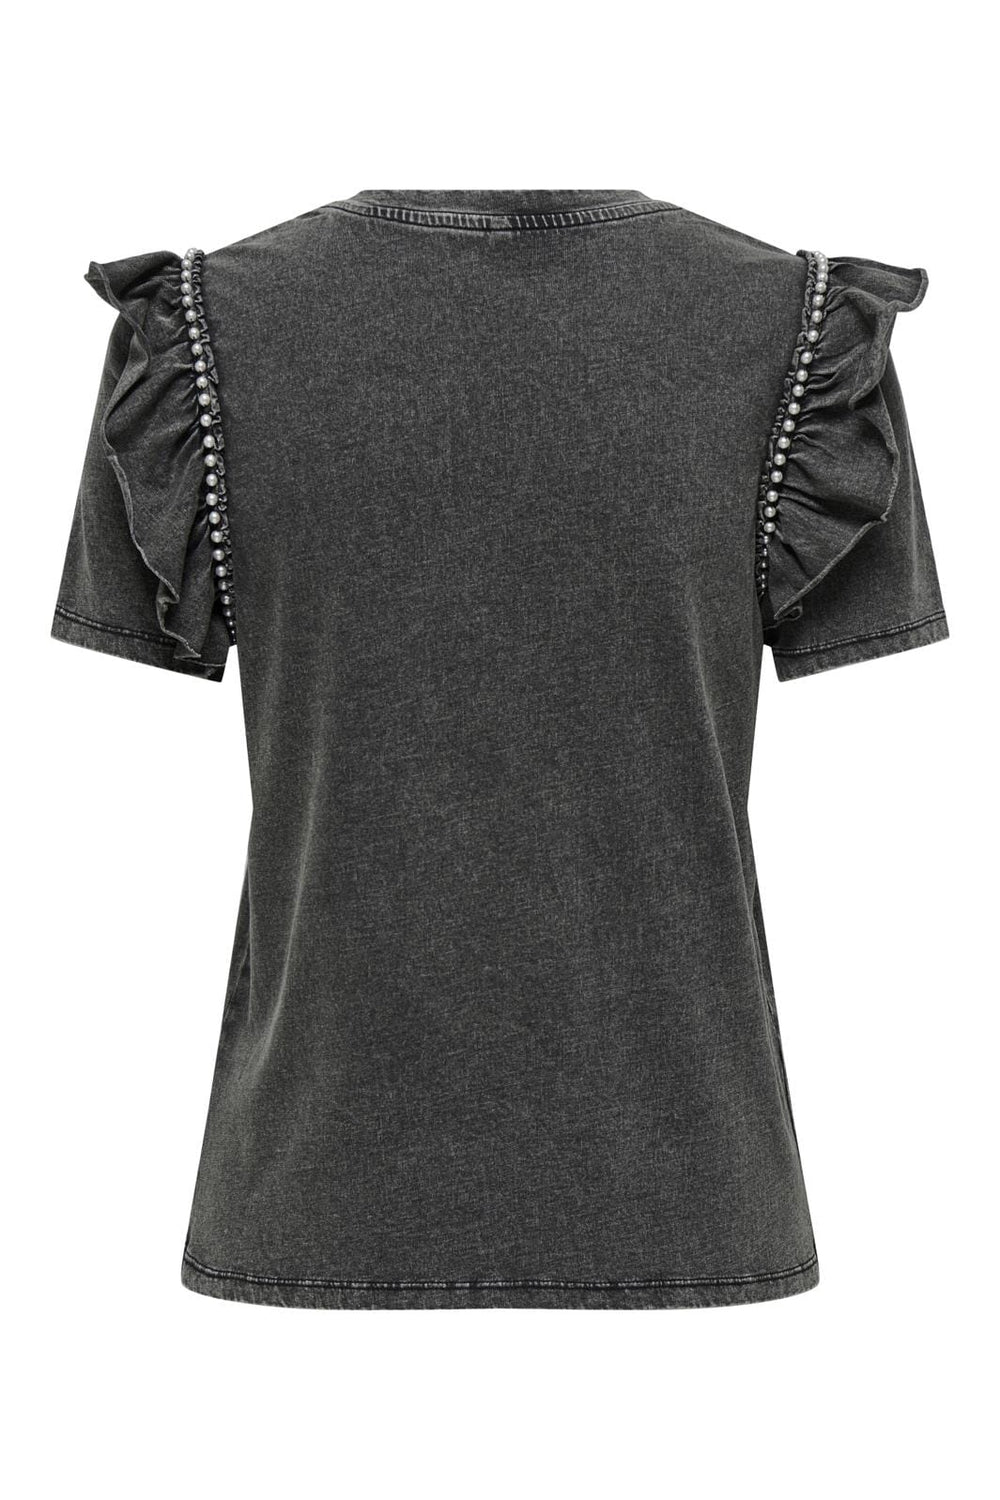 Only - Onllucy S/S Pearl Top - 4640190 Black Pearl